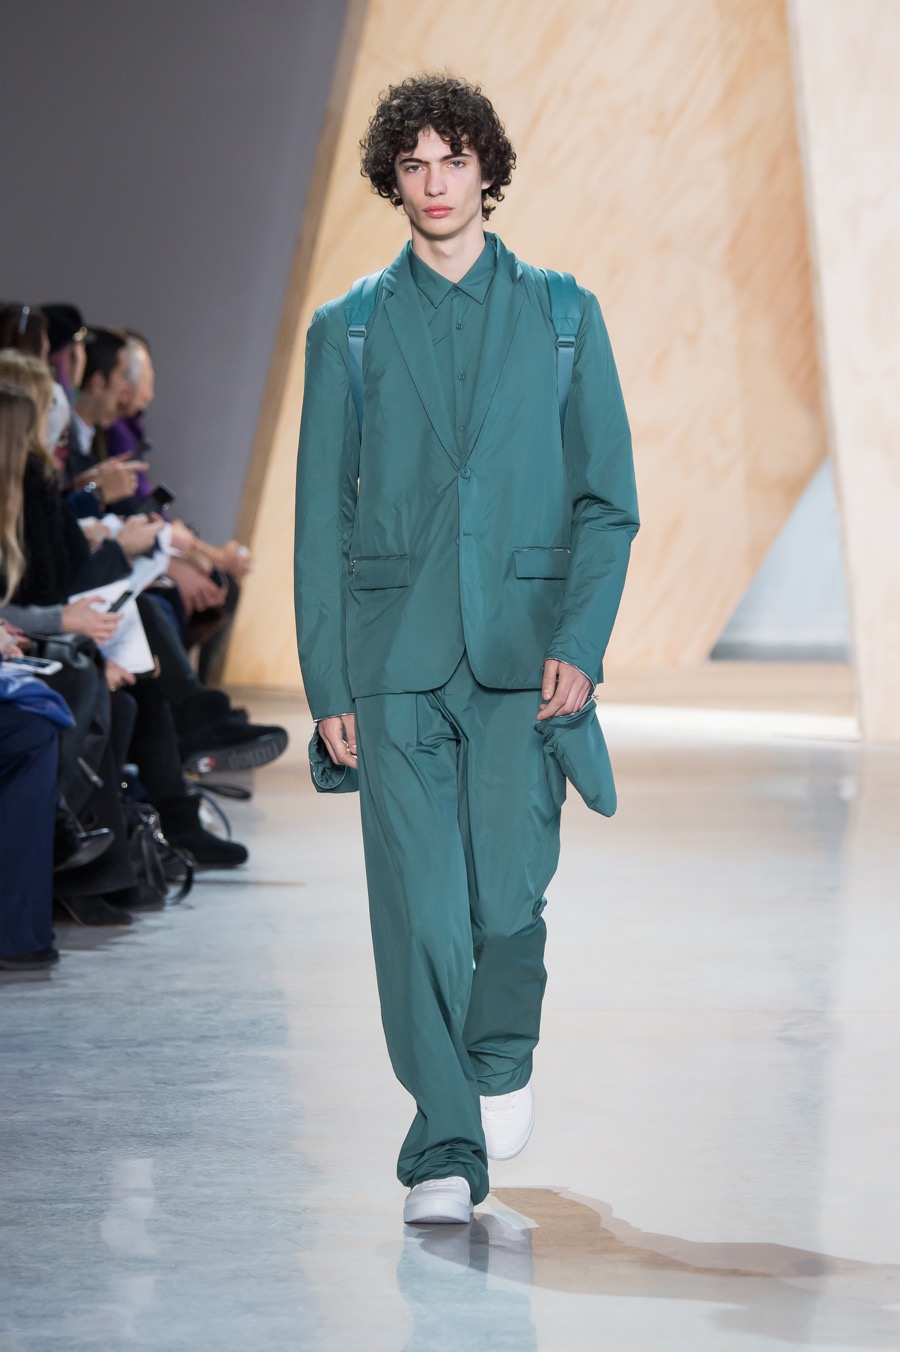 Lacoste 2016 Fall/Winter Men's Collection